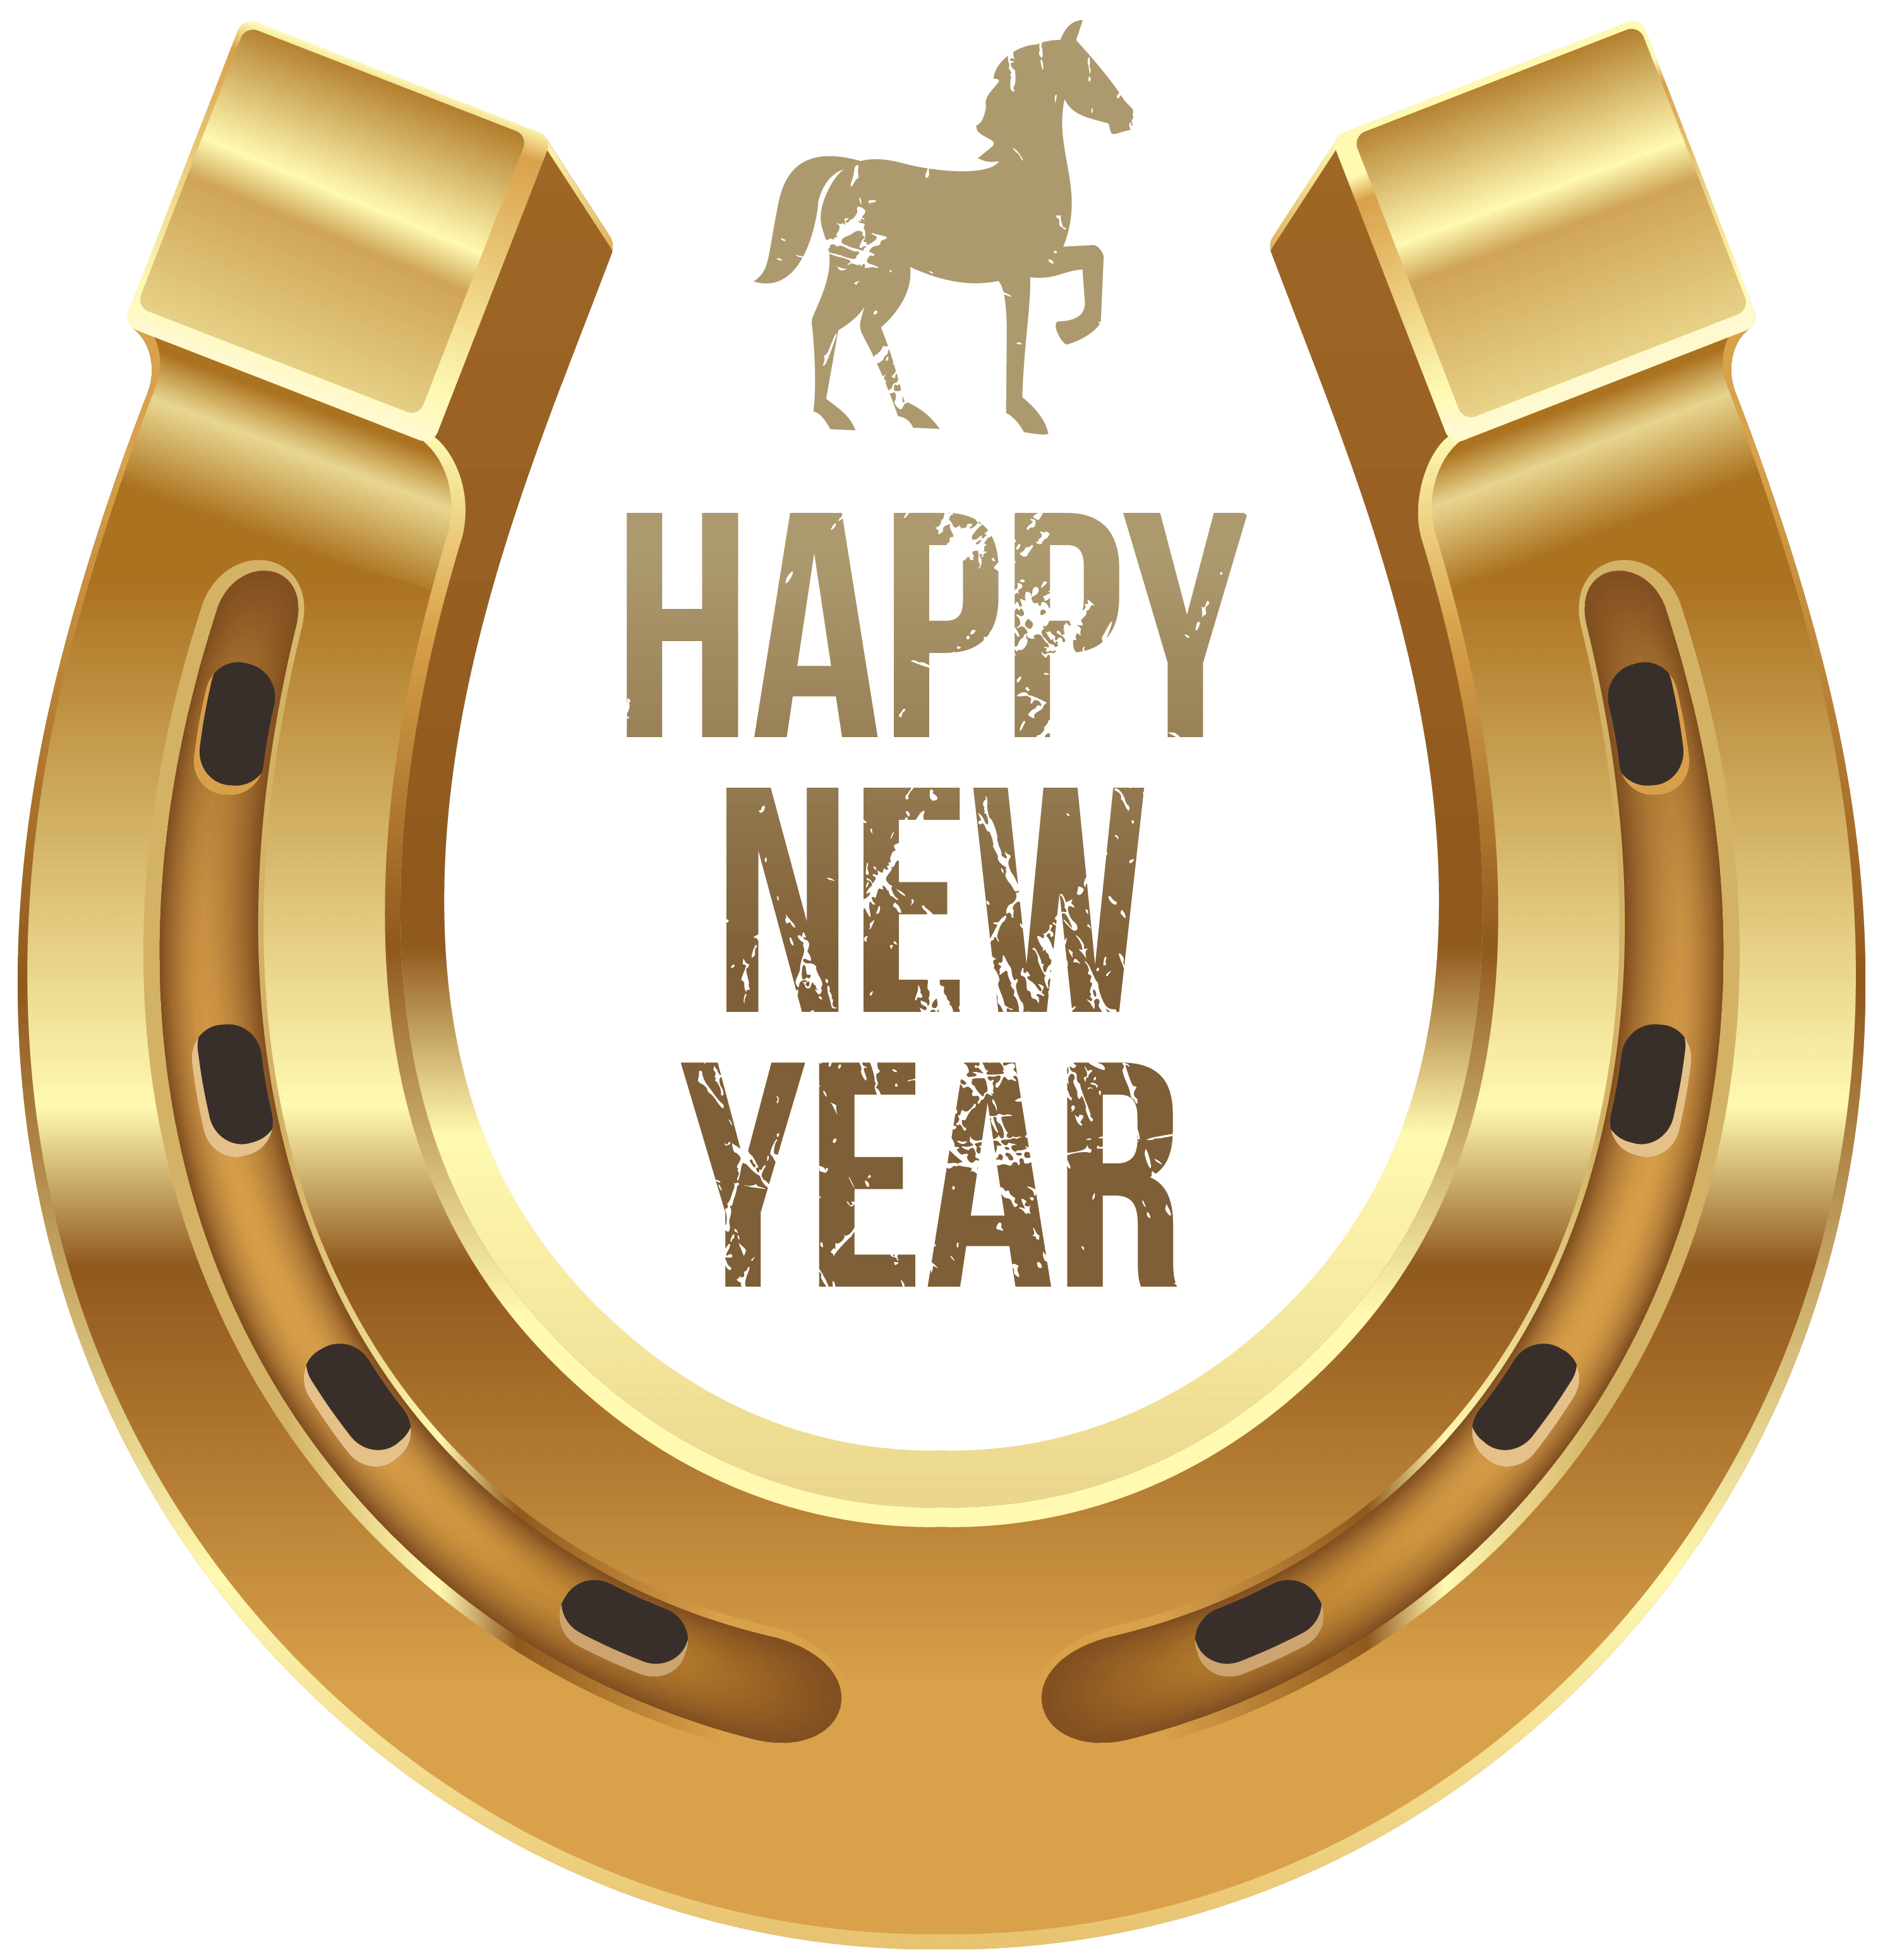 Horse and Horseshoe Logo - Happy New Year with Horse and Horseshoe PNG Clipart | Gallery ...